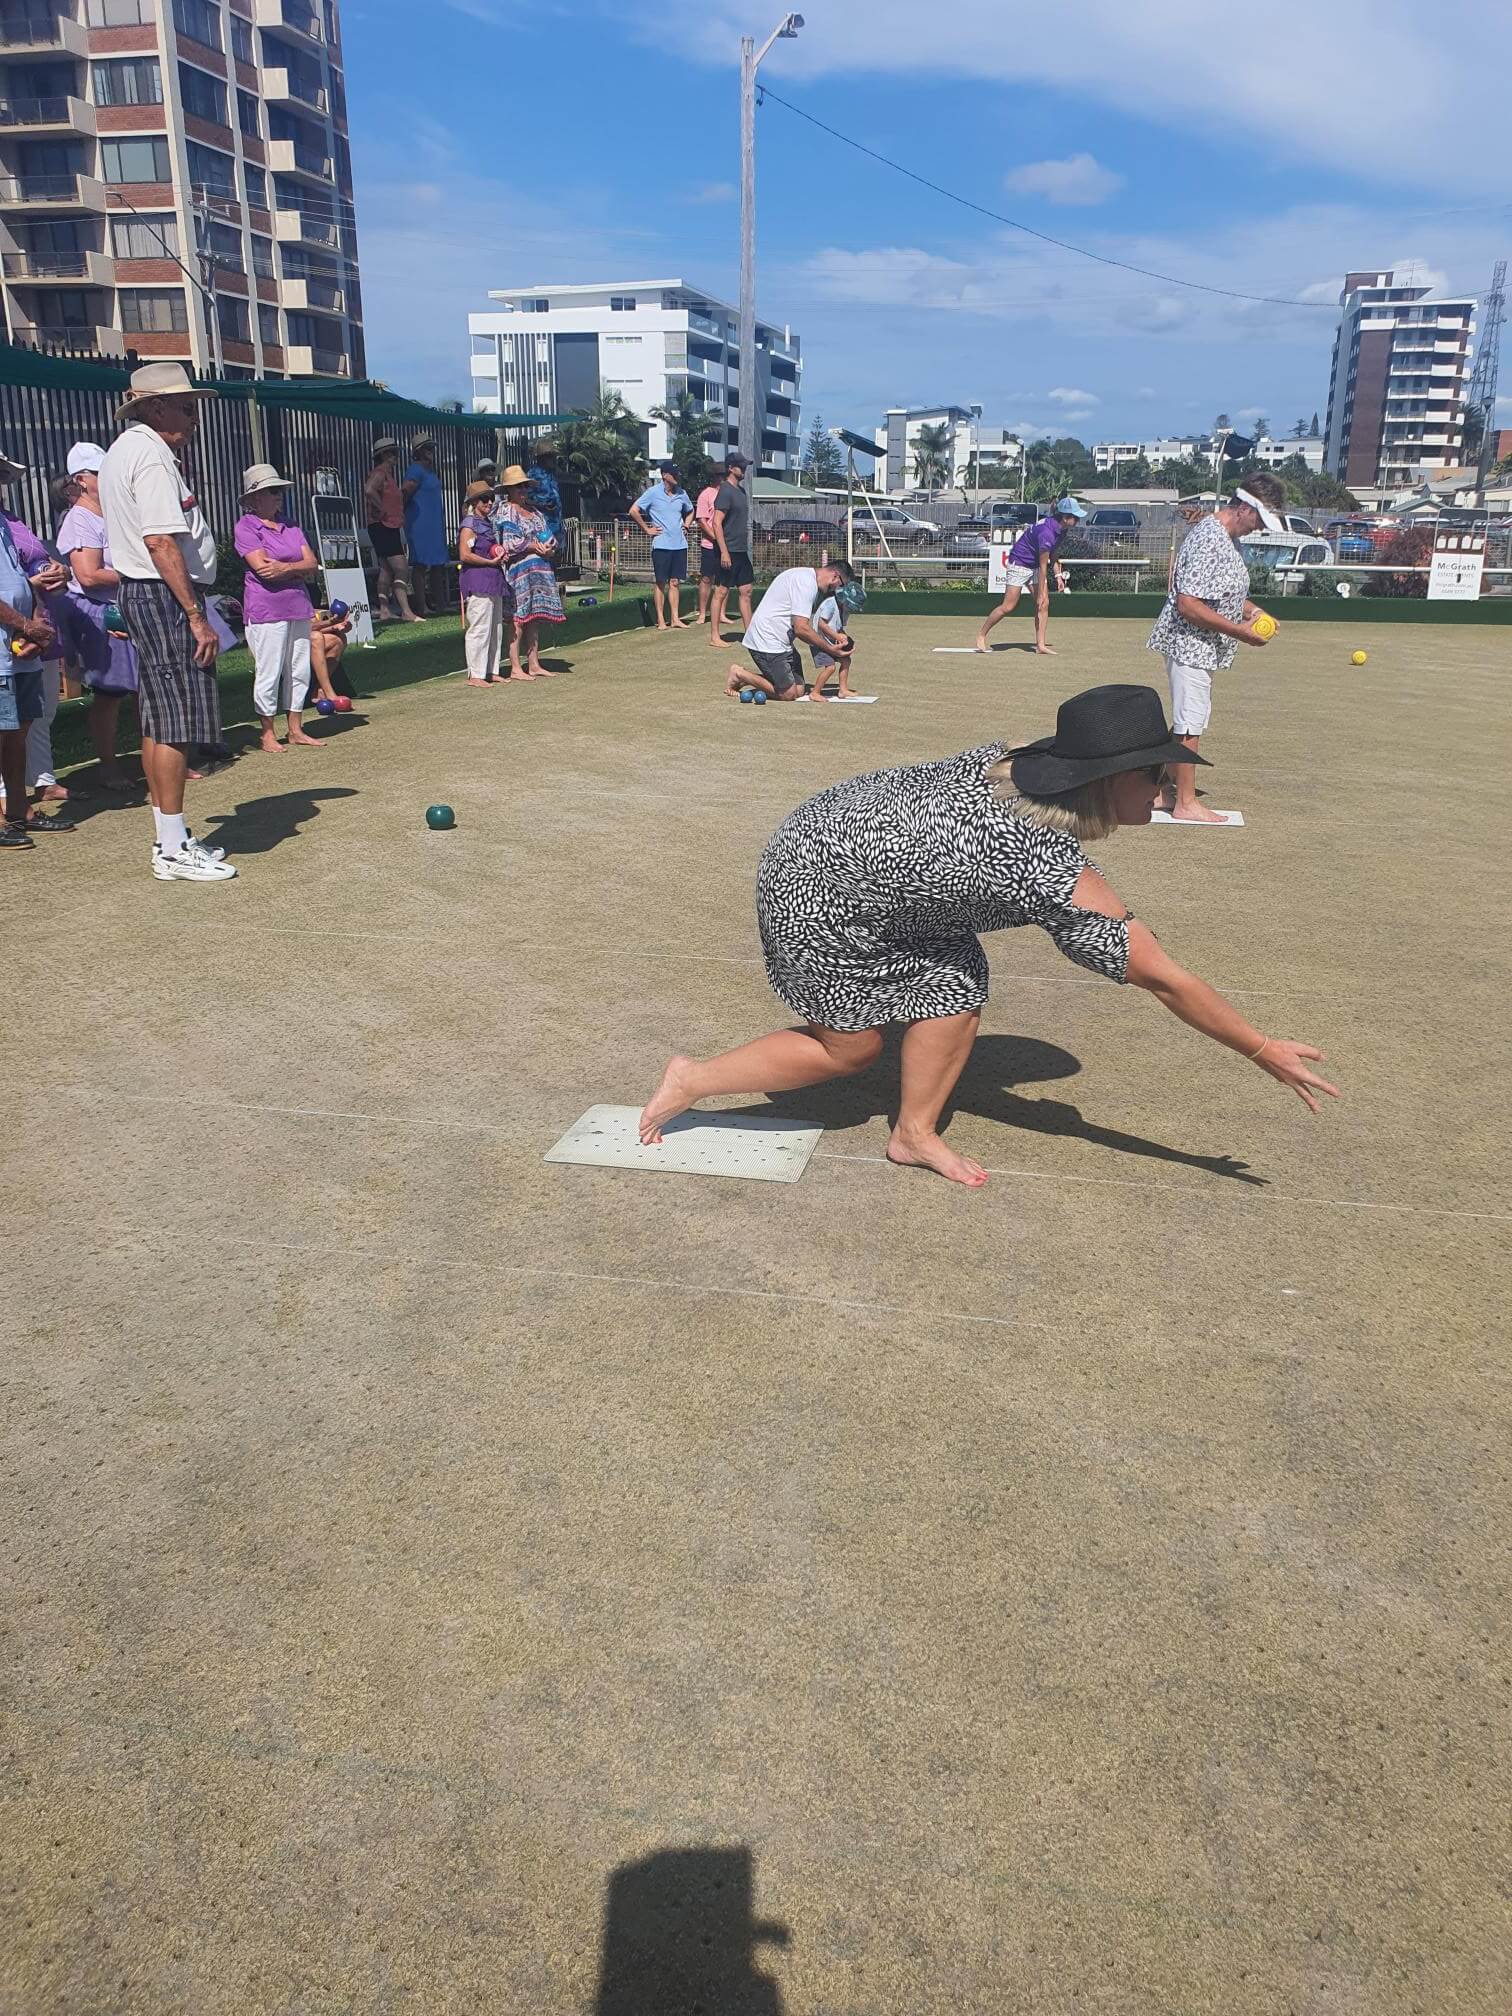 One of the Barefoot Bowlers showing how it is done in style. image